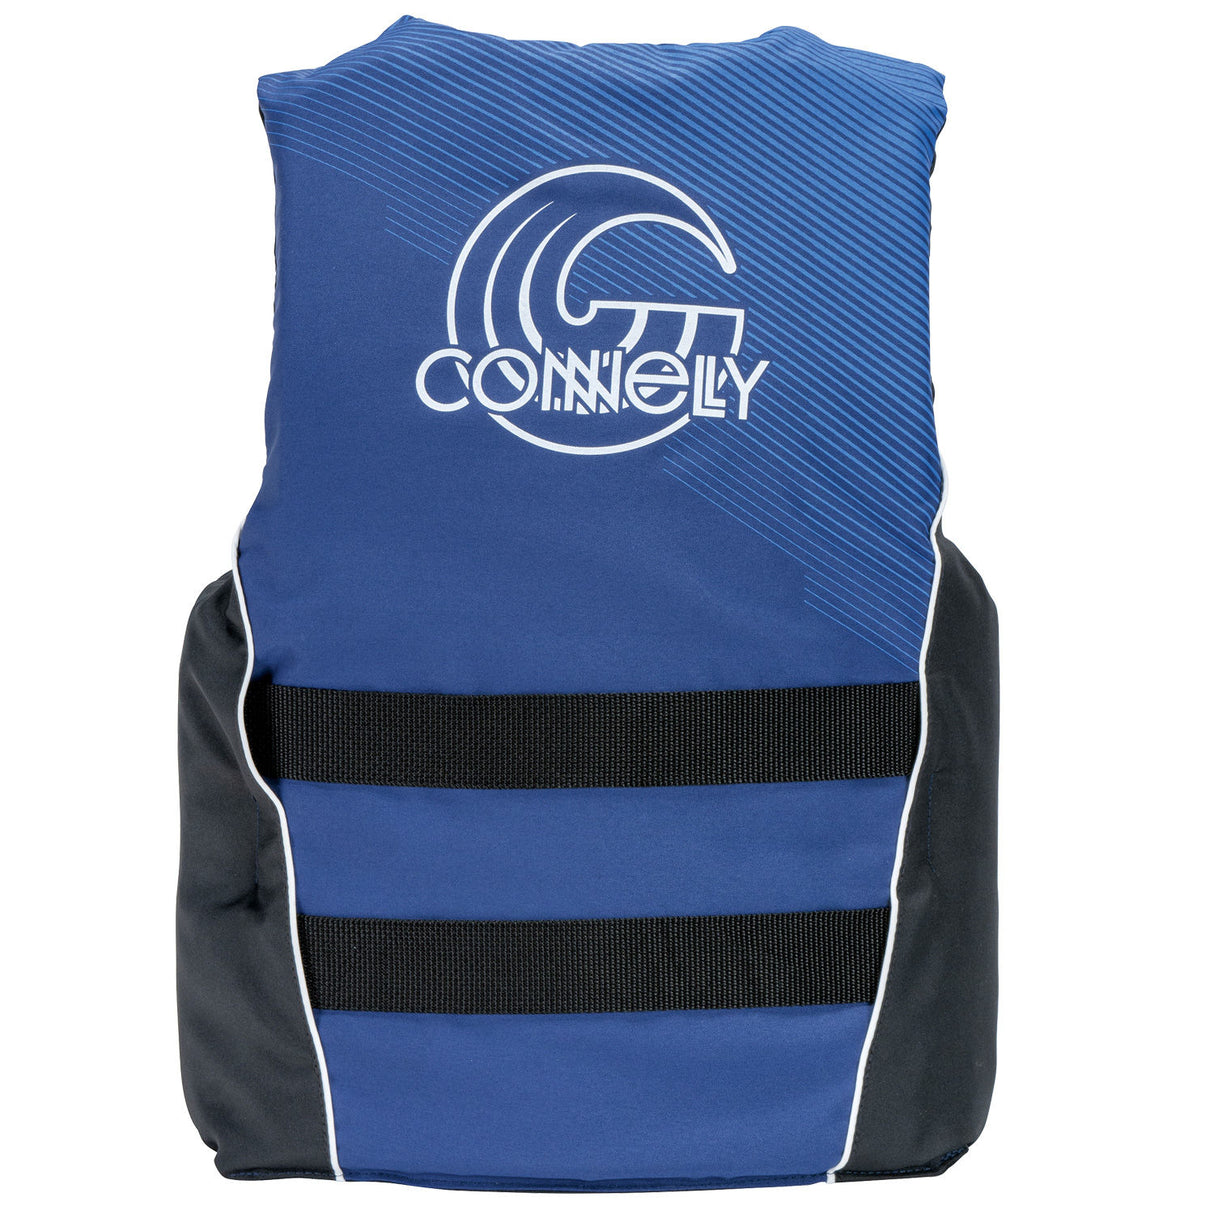 Connelly Tunnel Nylon Life Jacket - Teen / Navy Blue